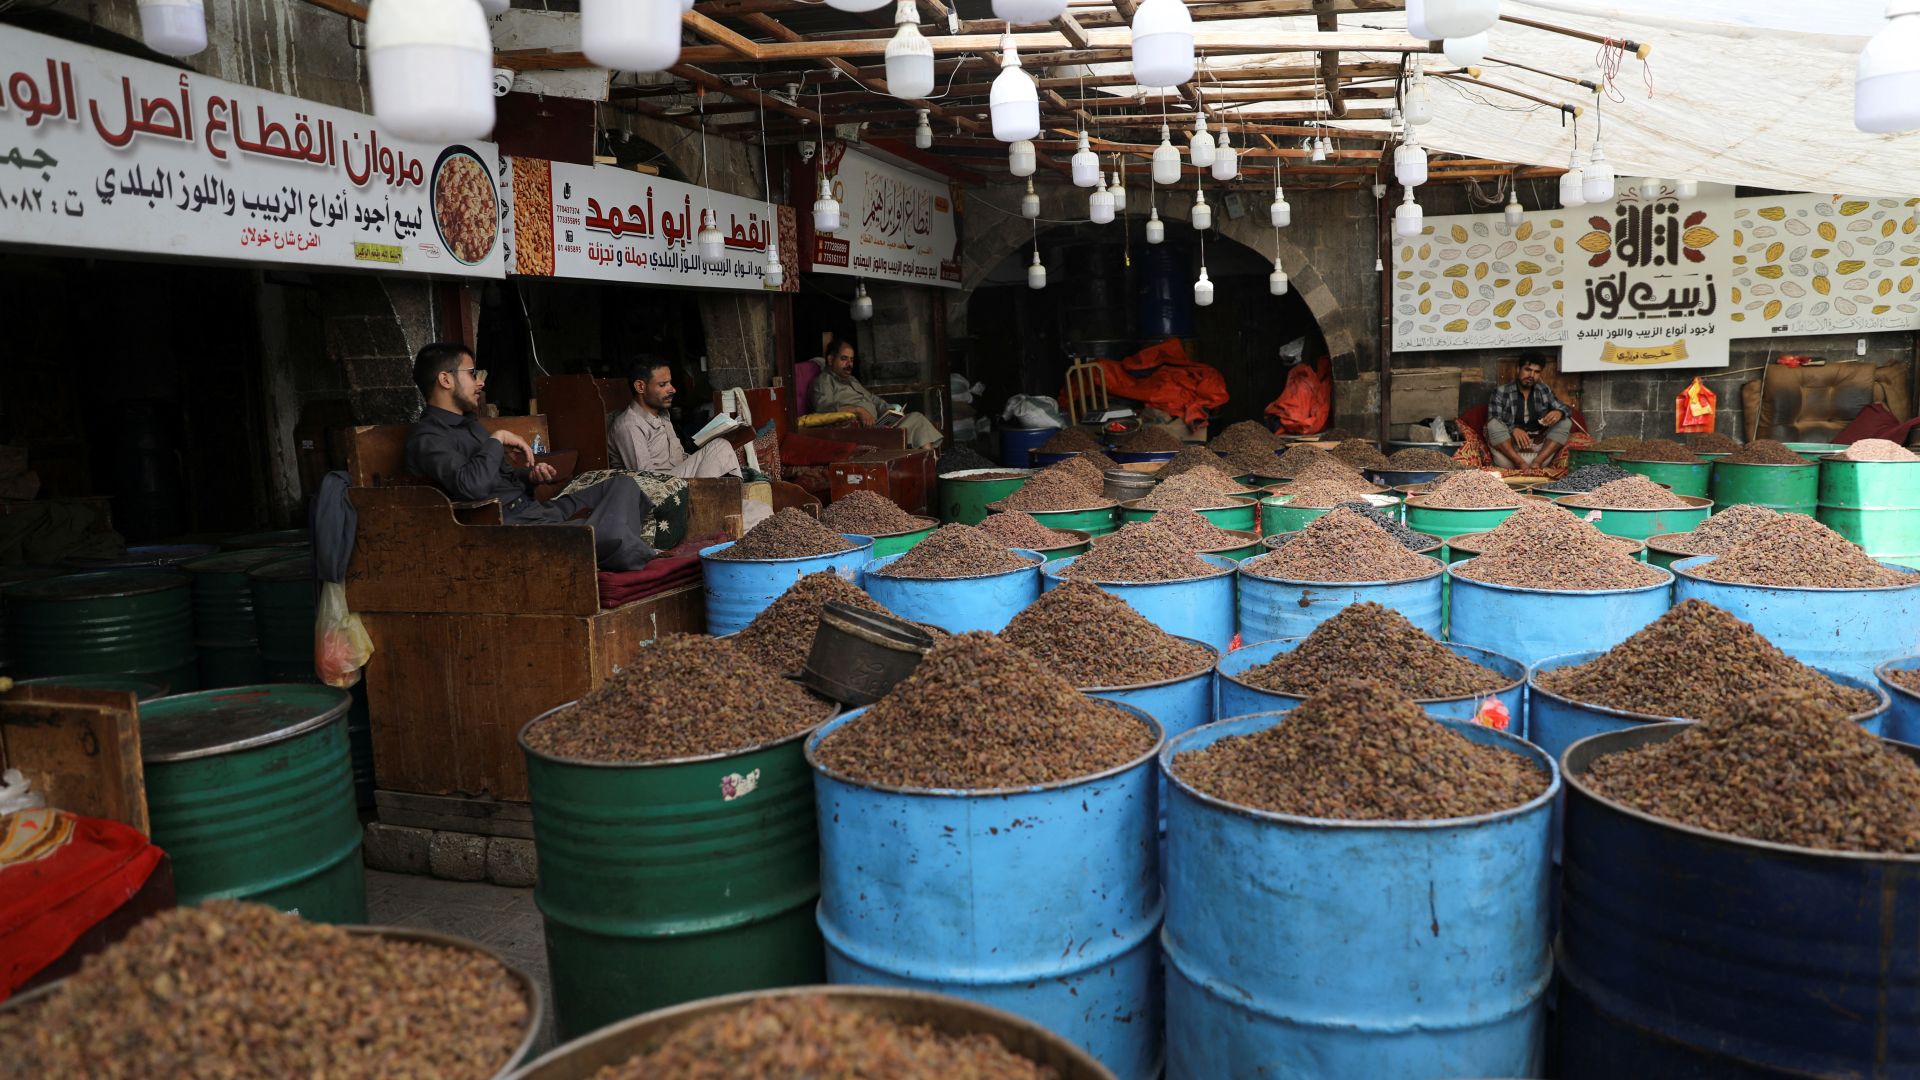 A photo of a market with barrels of raisins and people sitting in chairs behind the barrels.